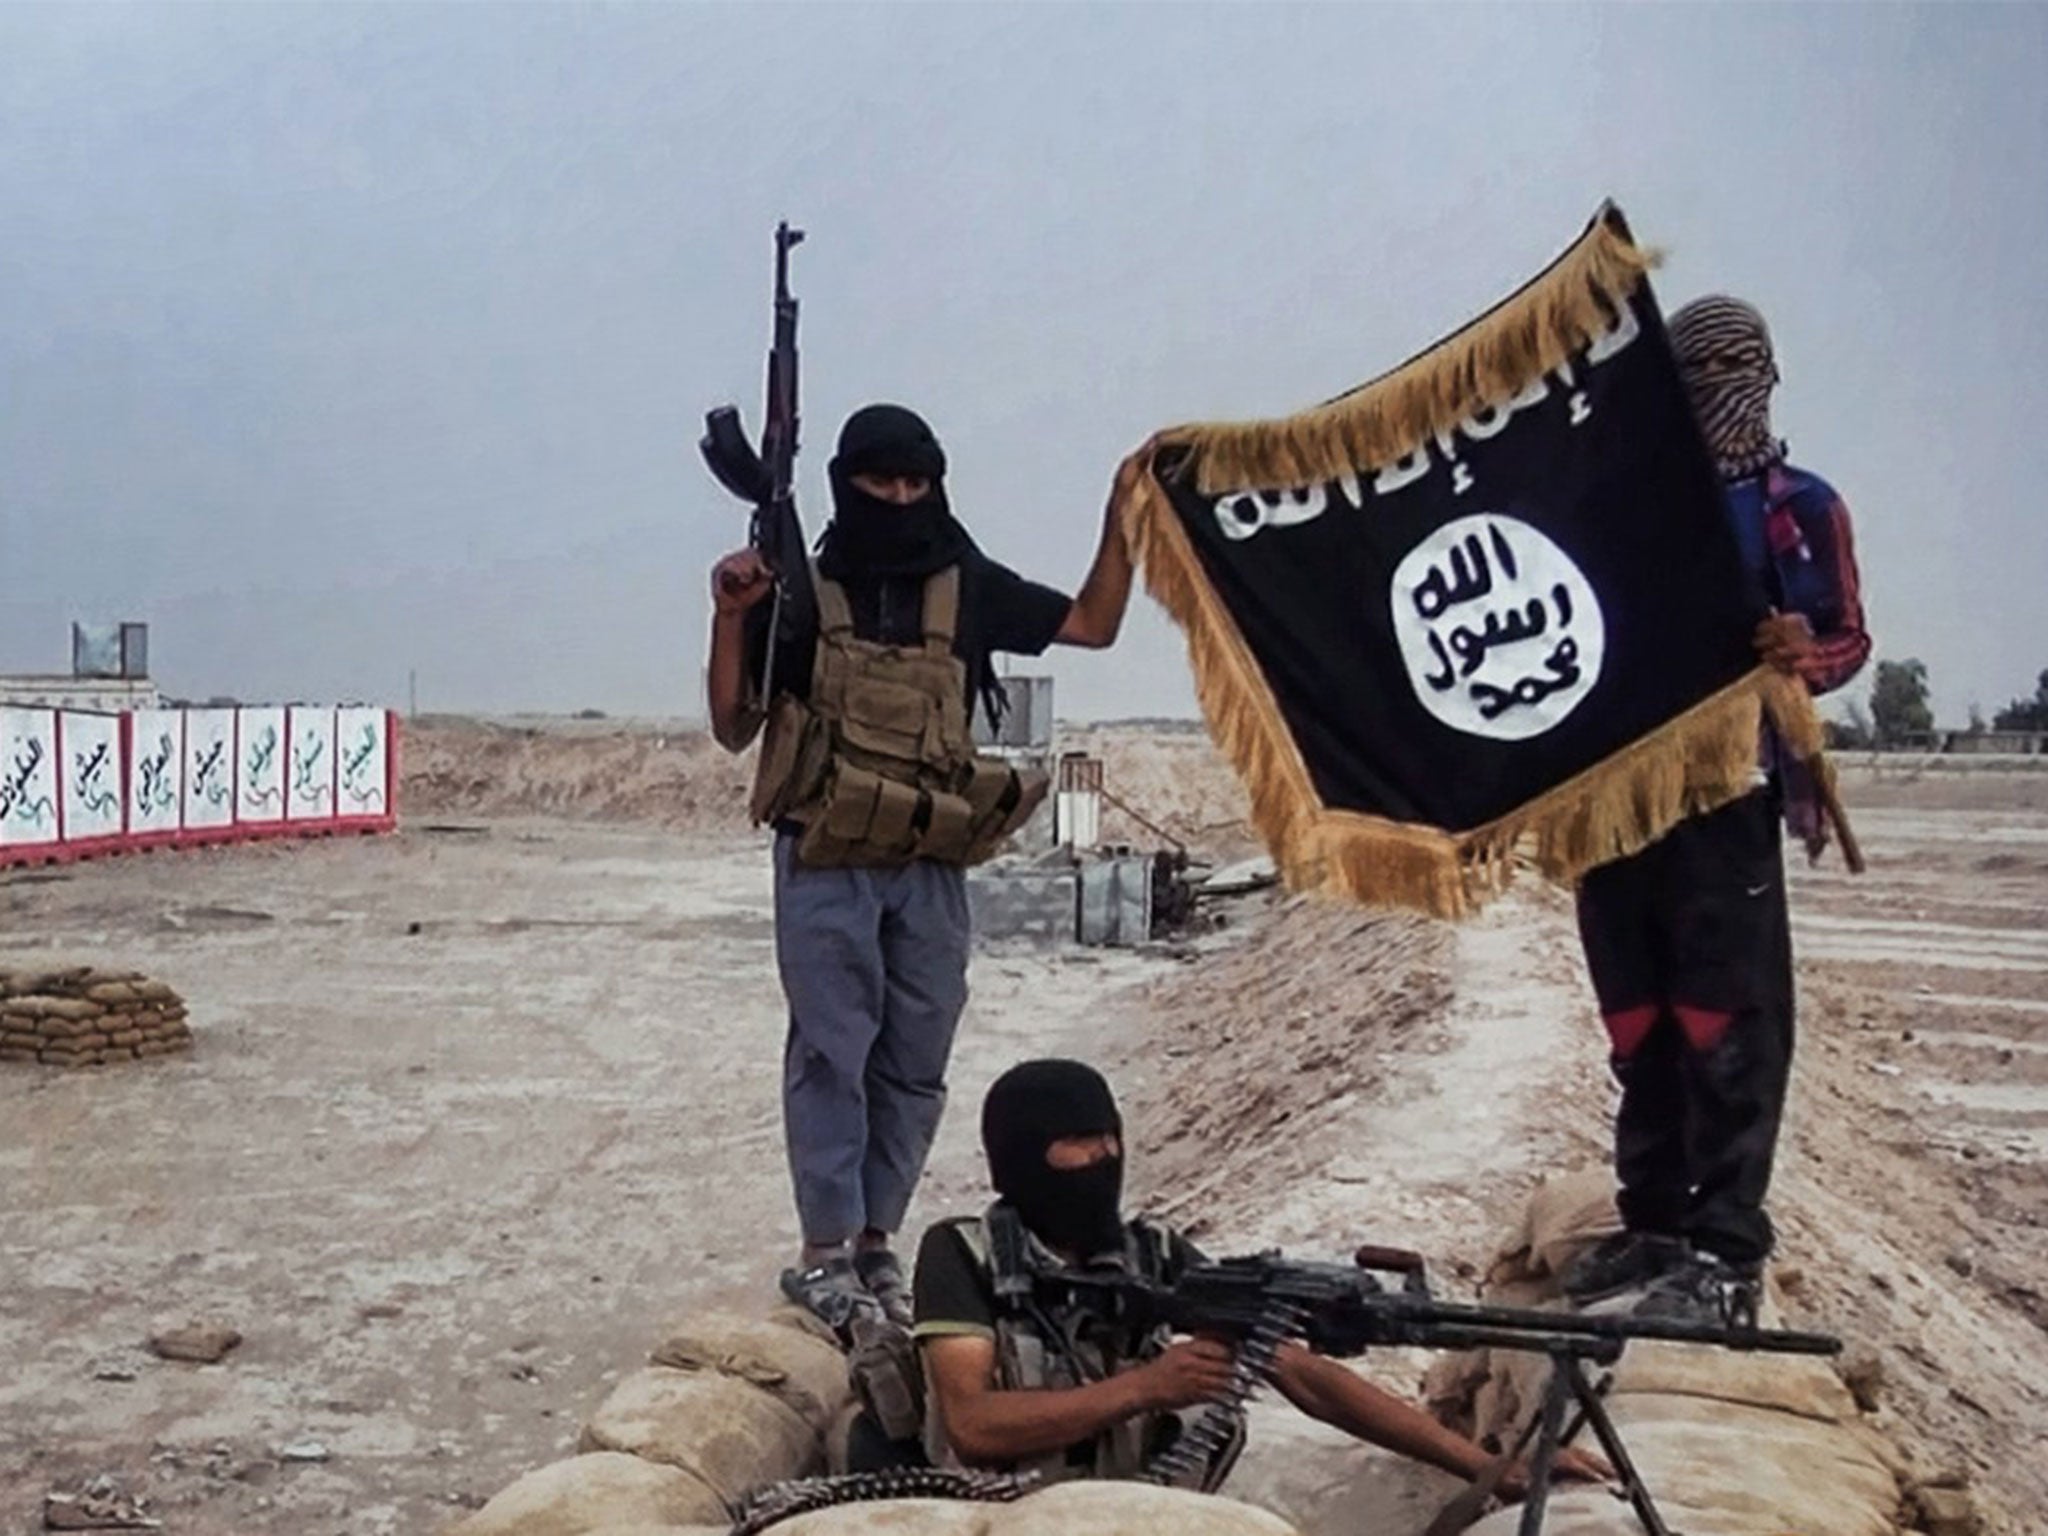 Isis rebels show their flag after seizing an army post